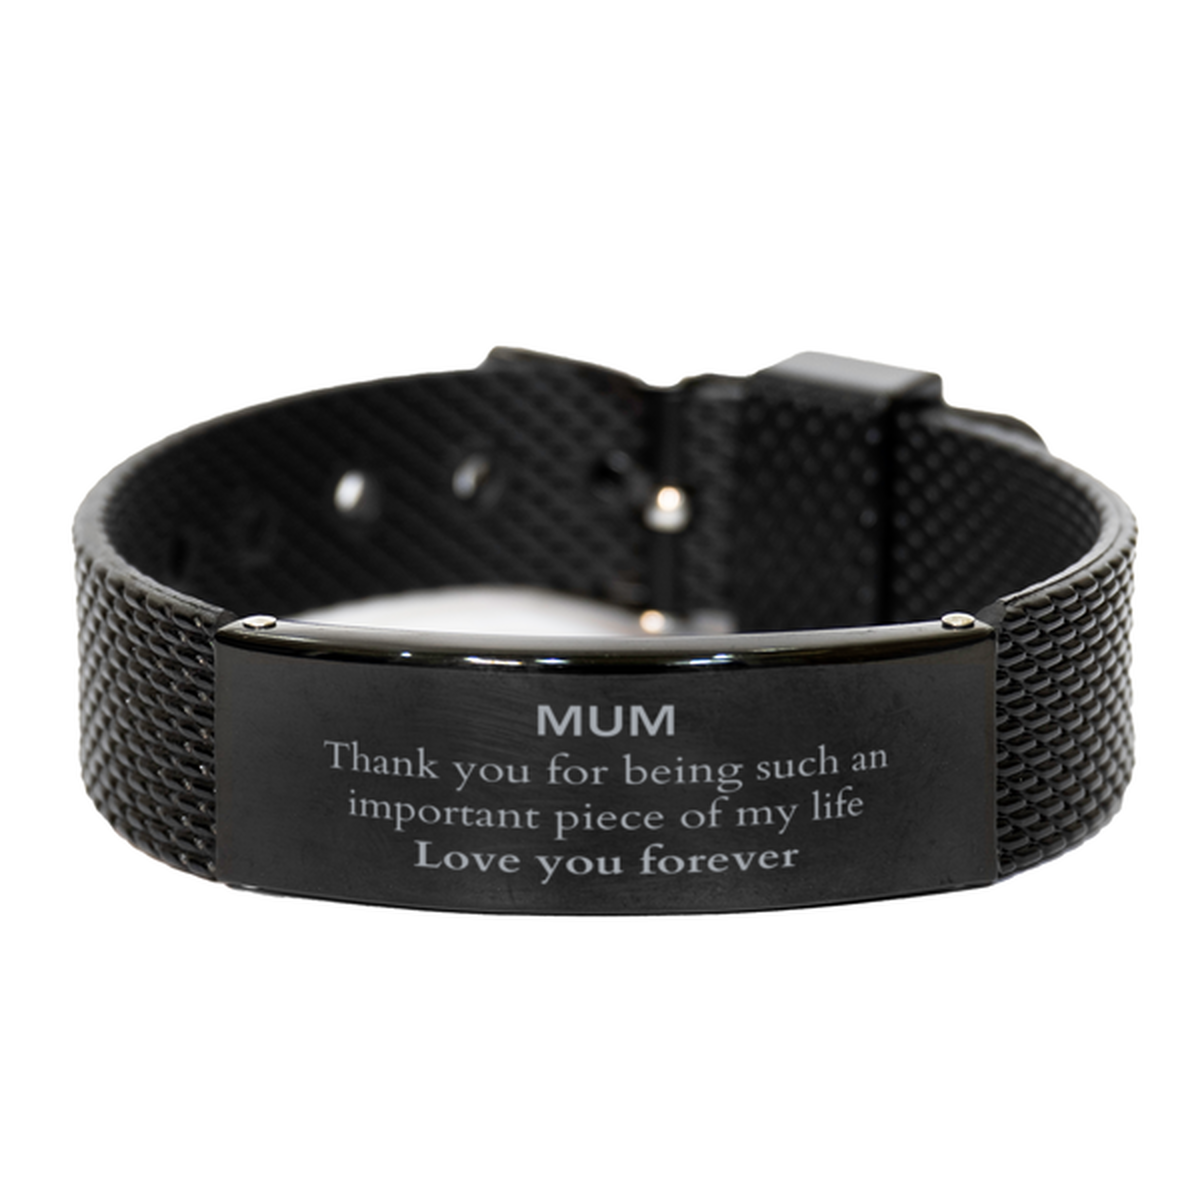 Appropriate Mum Black Shark Mesh Bracelet Epic Birthday Gifts for Mum Thank you for being such an important piece of my life Mum Christmas Mothers Fathers Day